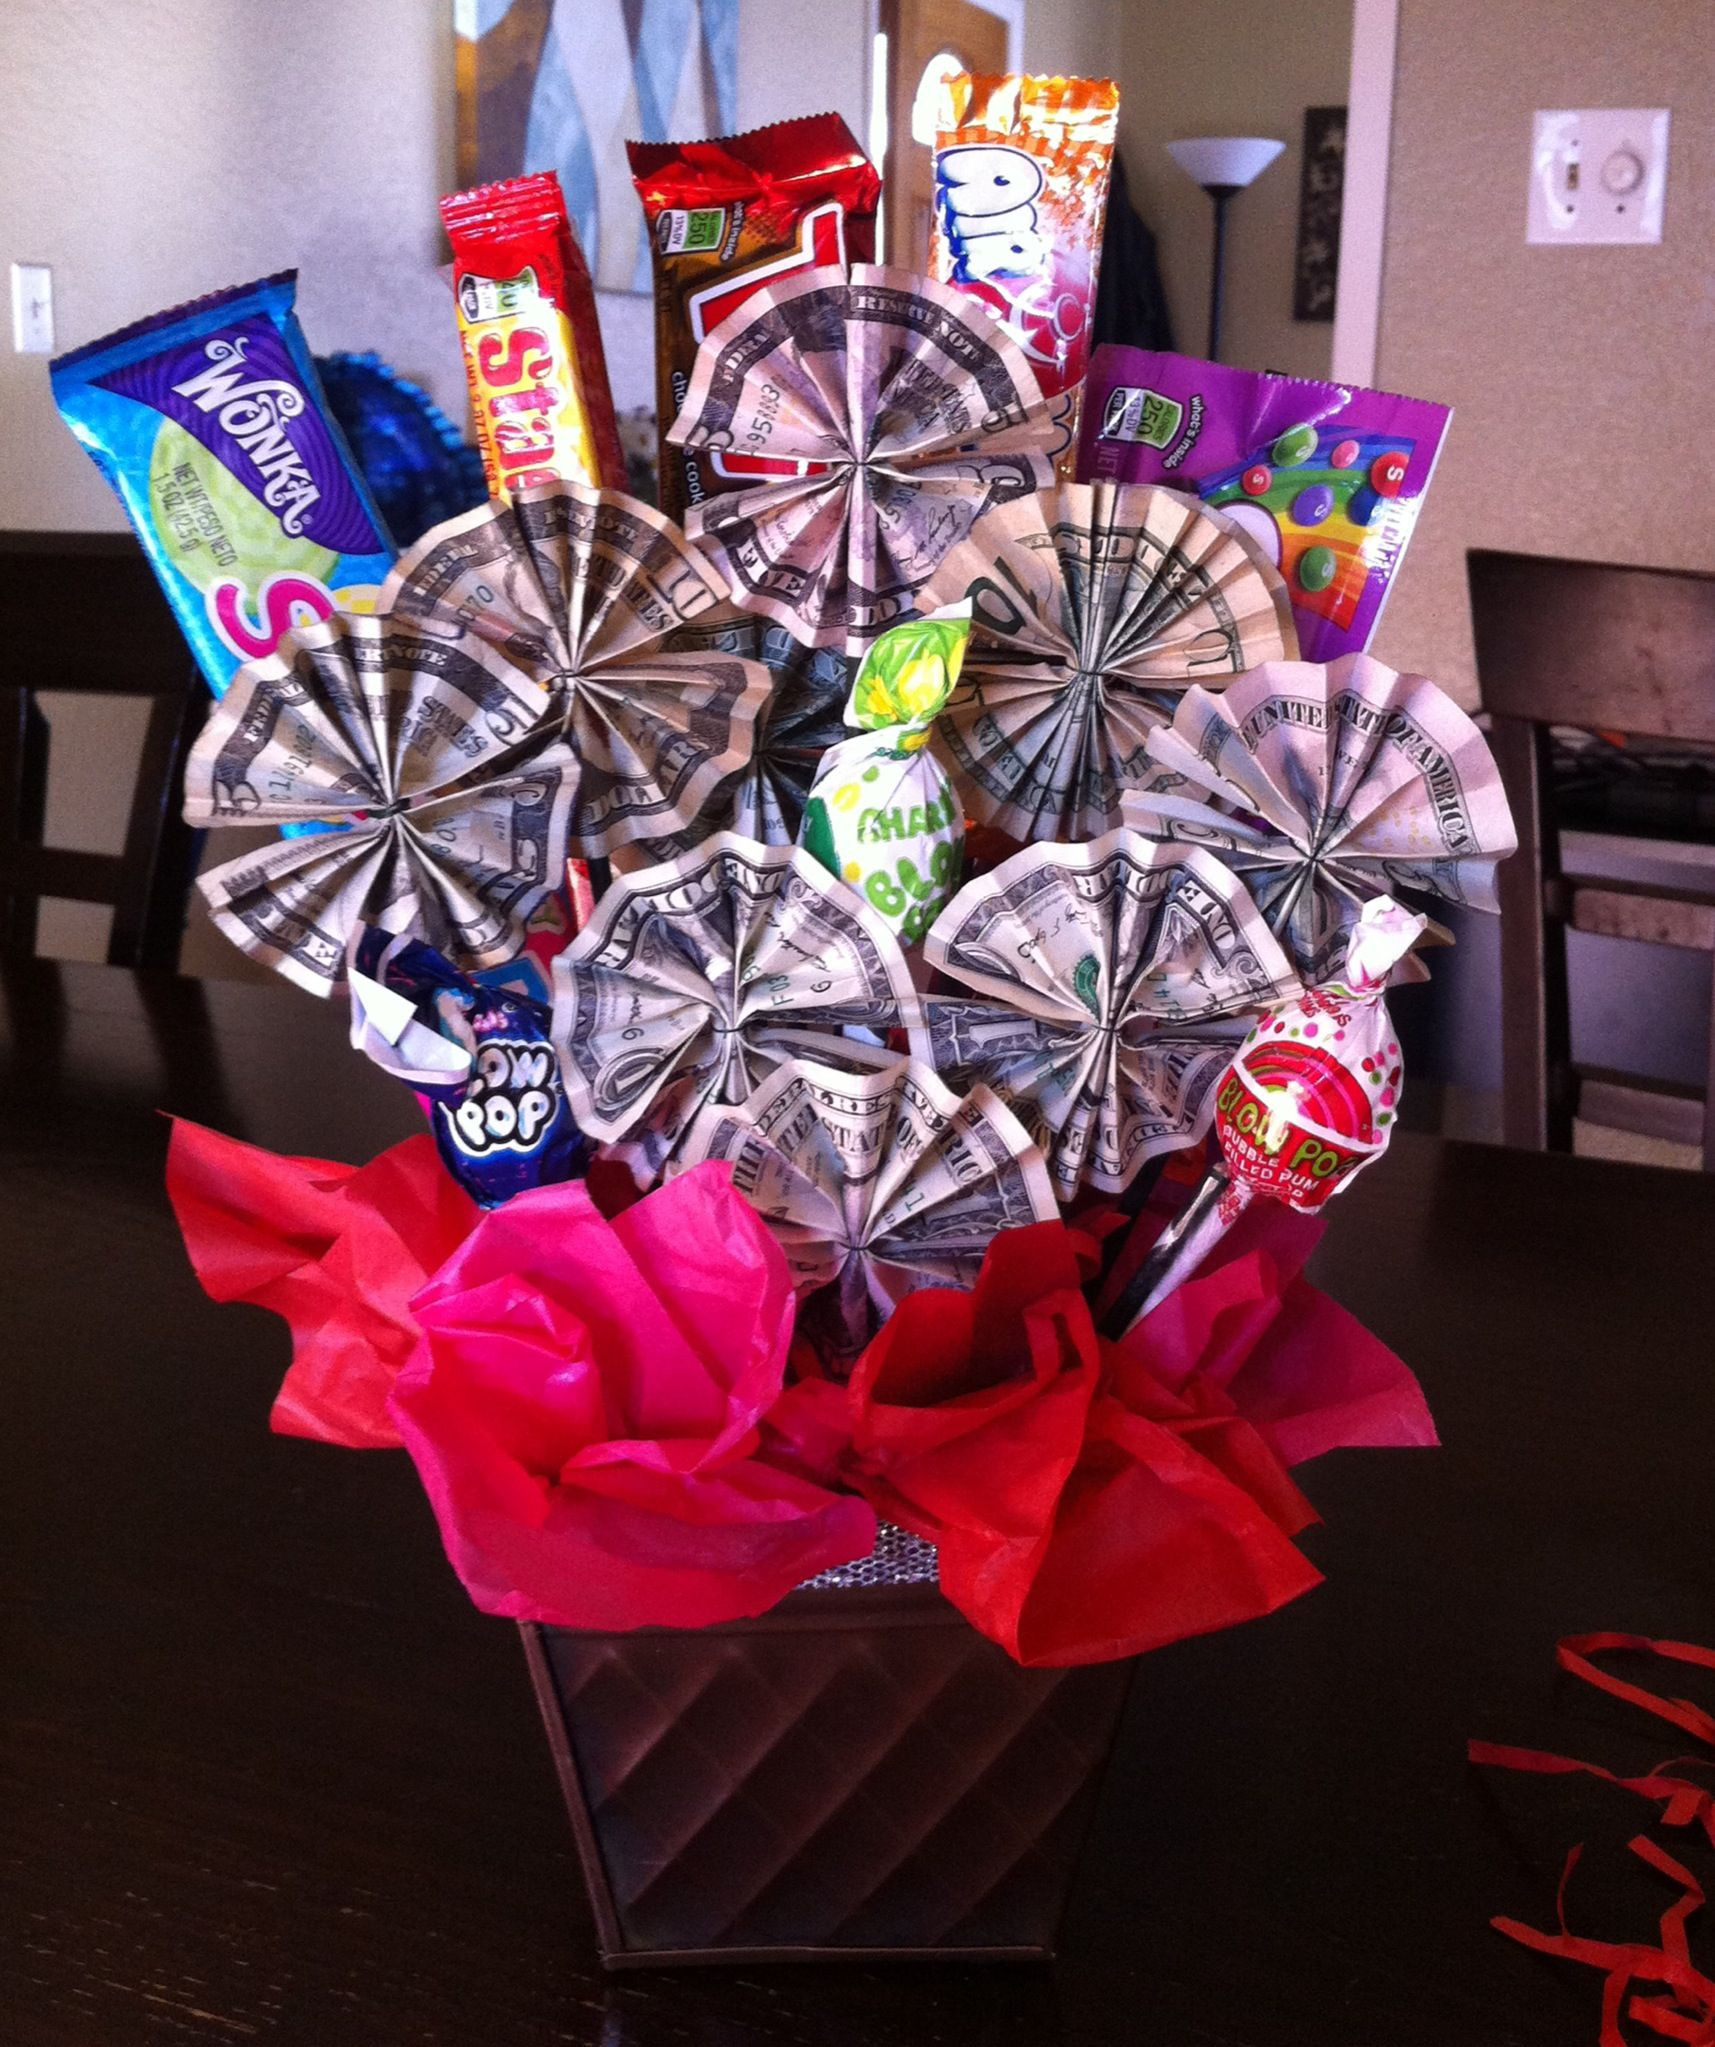 6Th Grade Graduation Gift Ideas
 Money candy bouquet I made this for my niece as a t